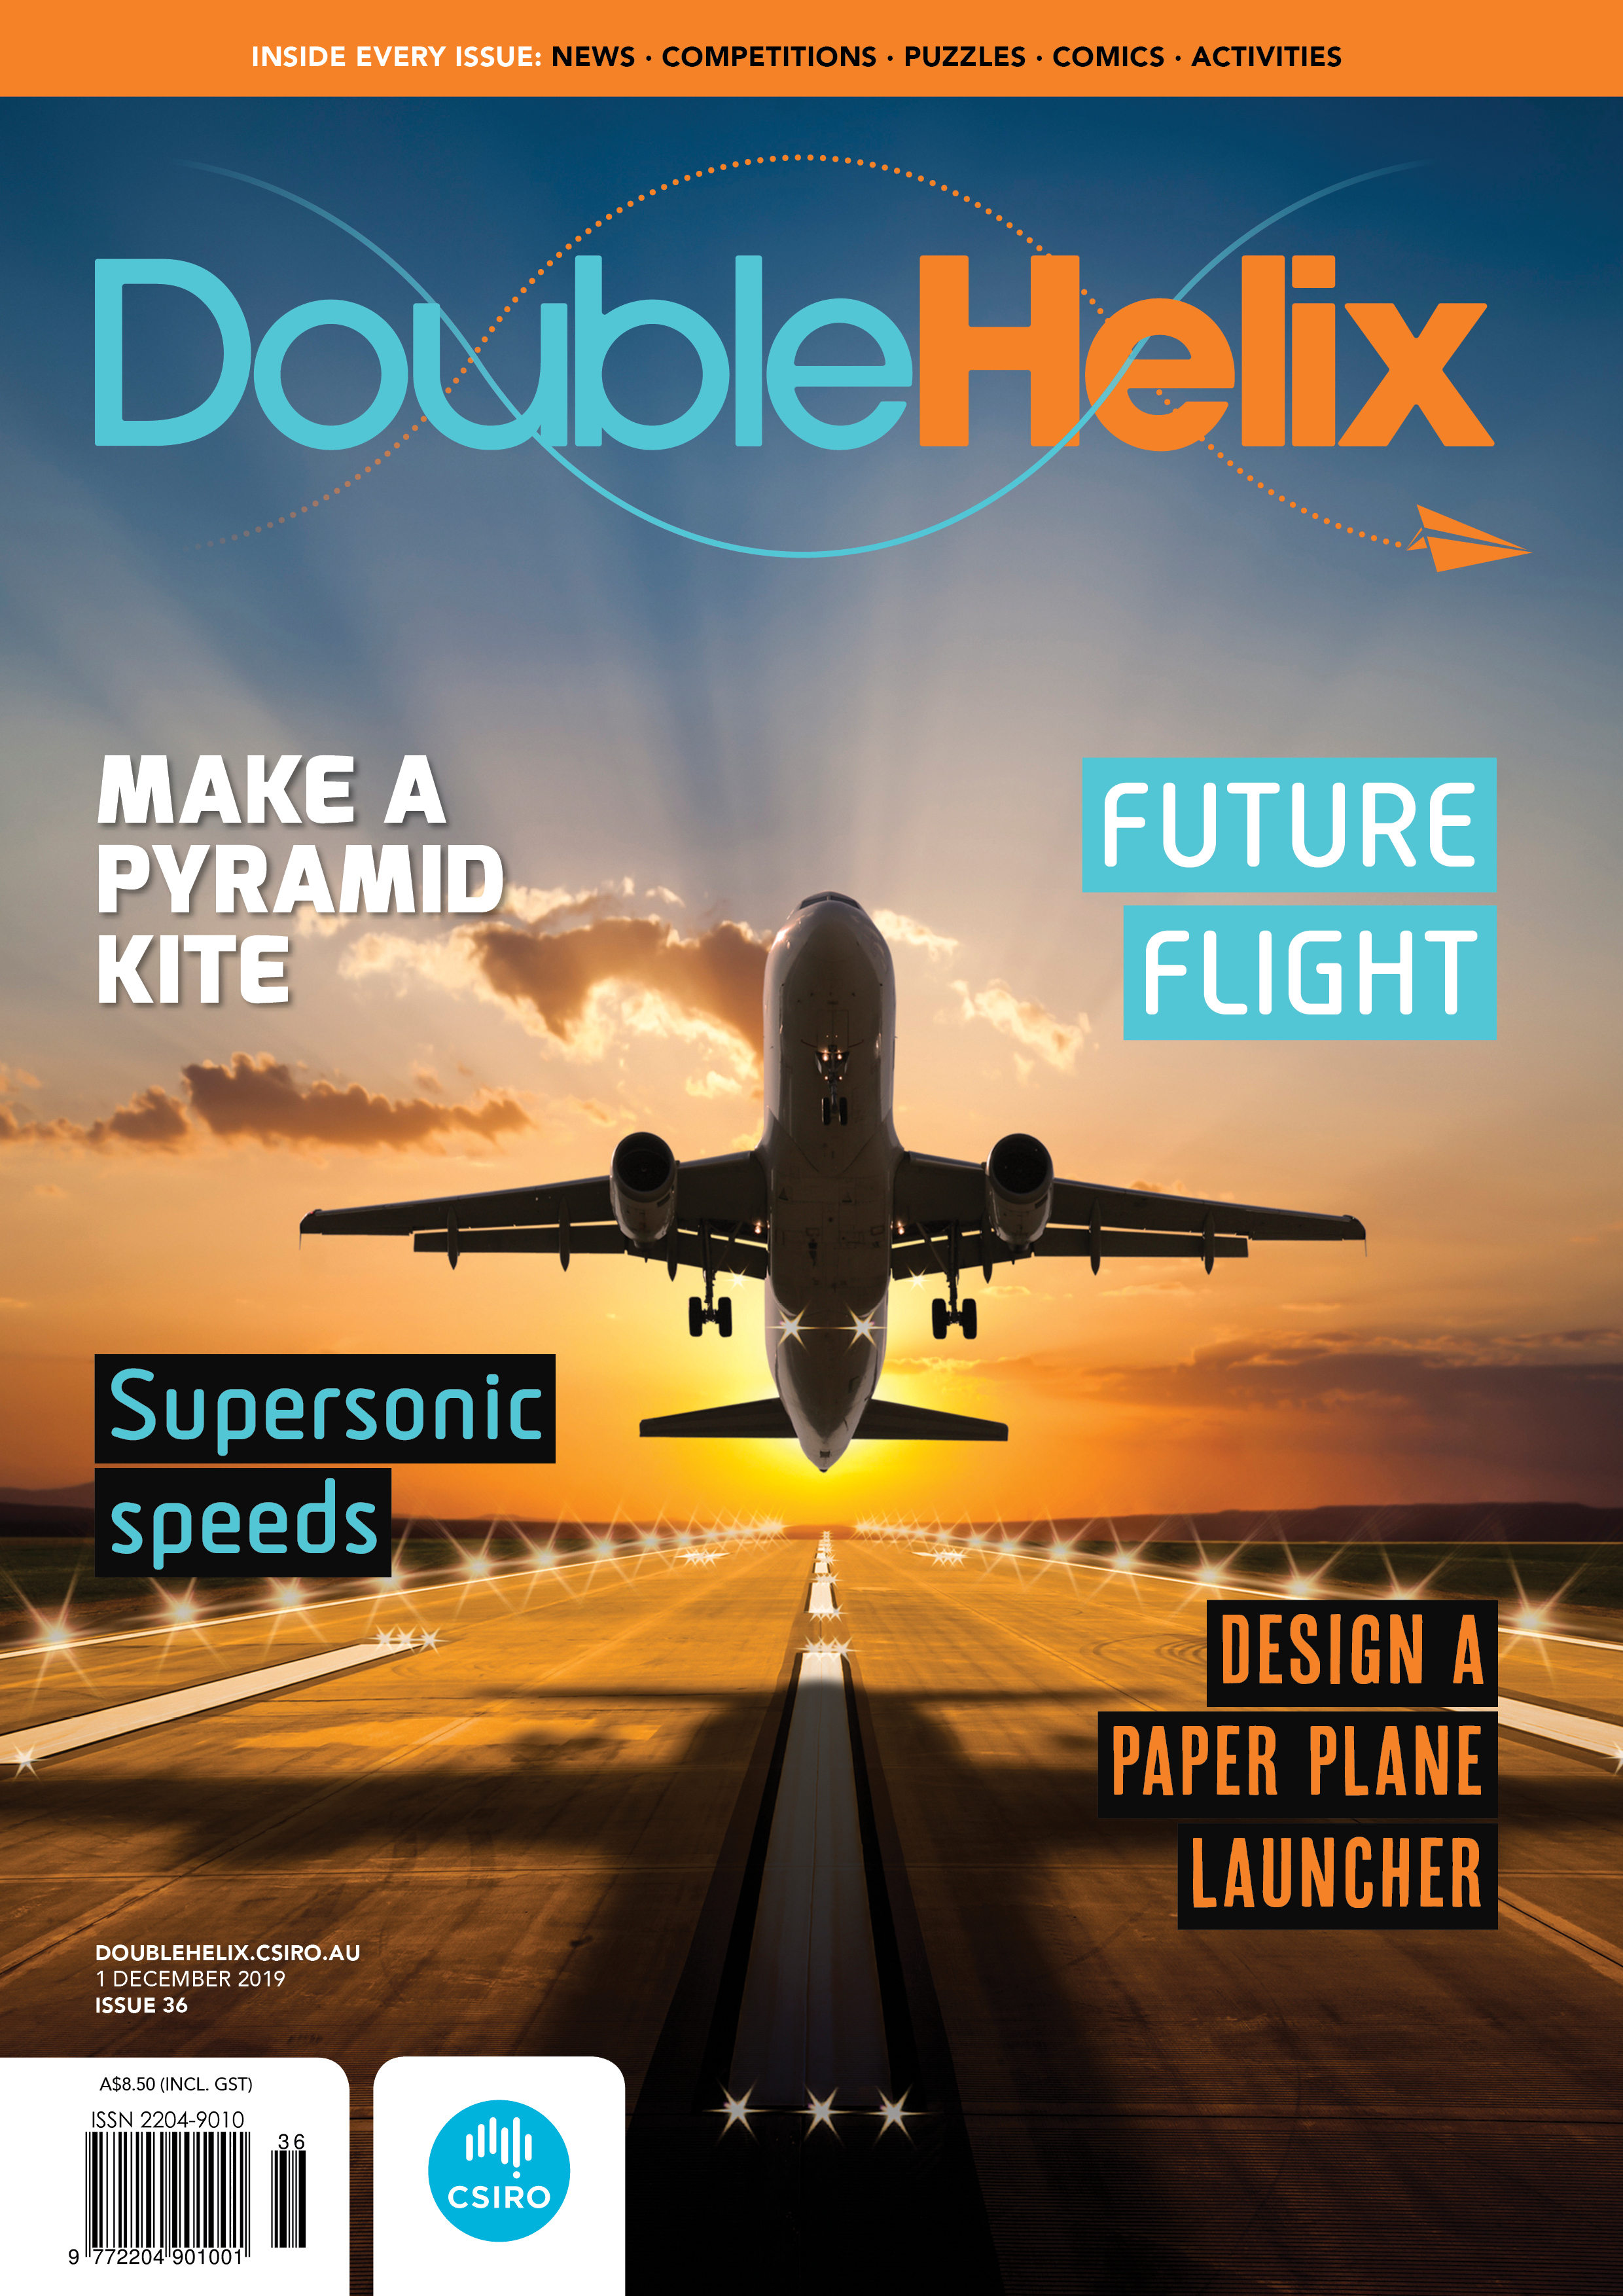 Cover of Double Helix magazine Issue 36 showing an aeroplane above a runway, with the sun low on the horizon behind it.